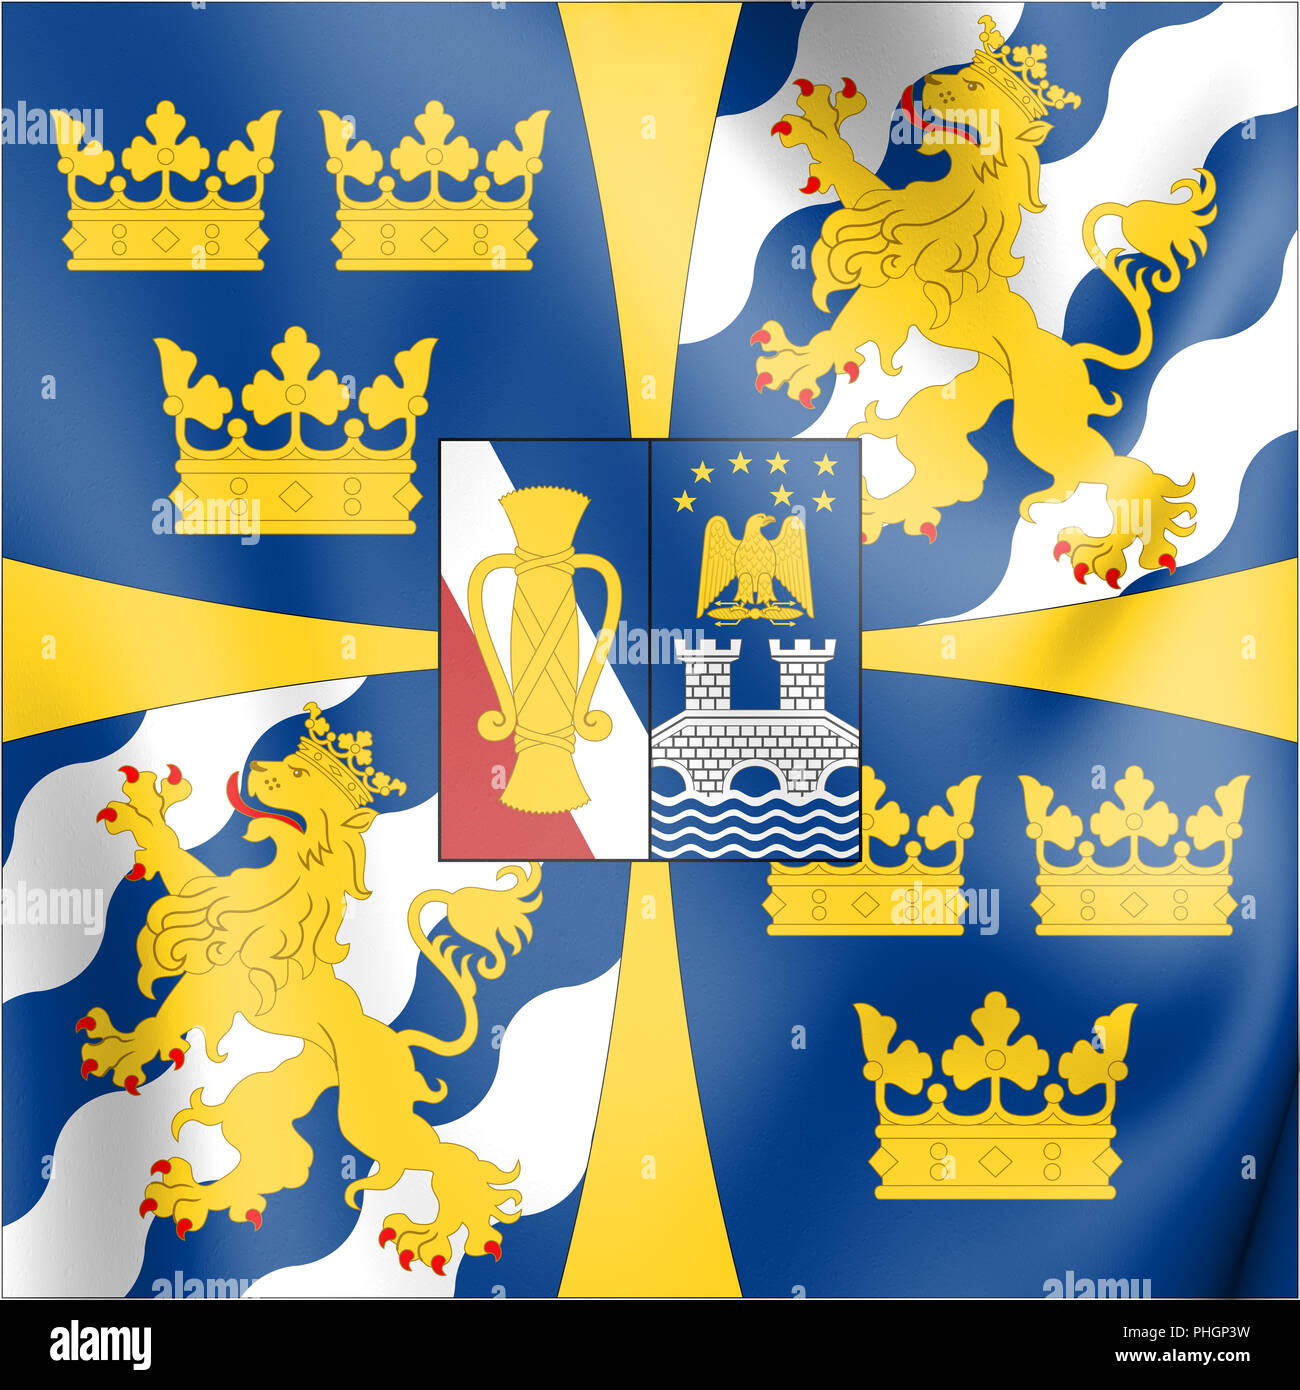 King of Sweden Personal Command Sign. 3D Illustration. Stock Photo